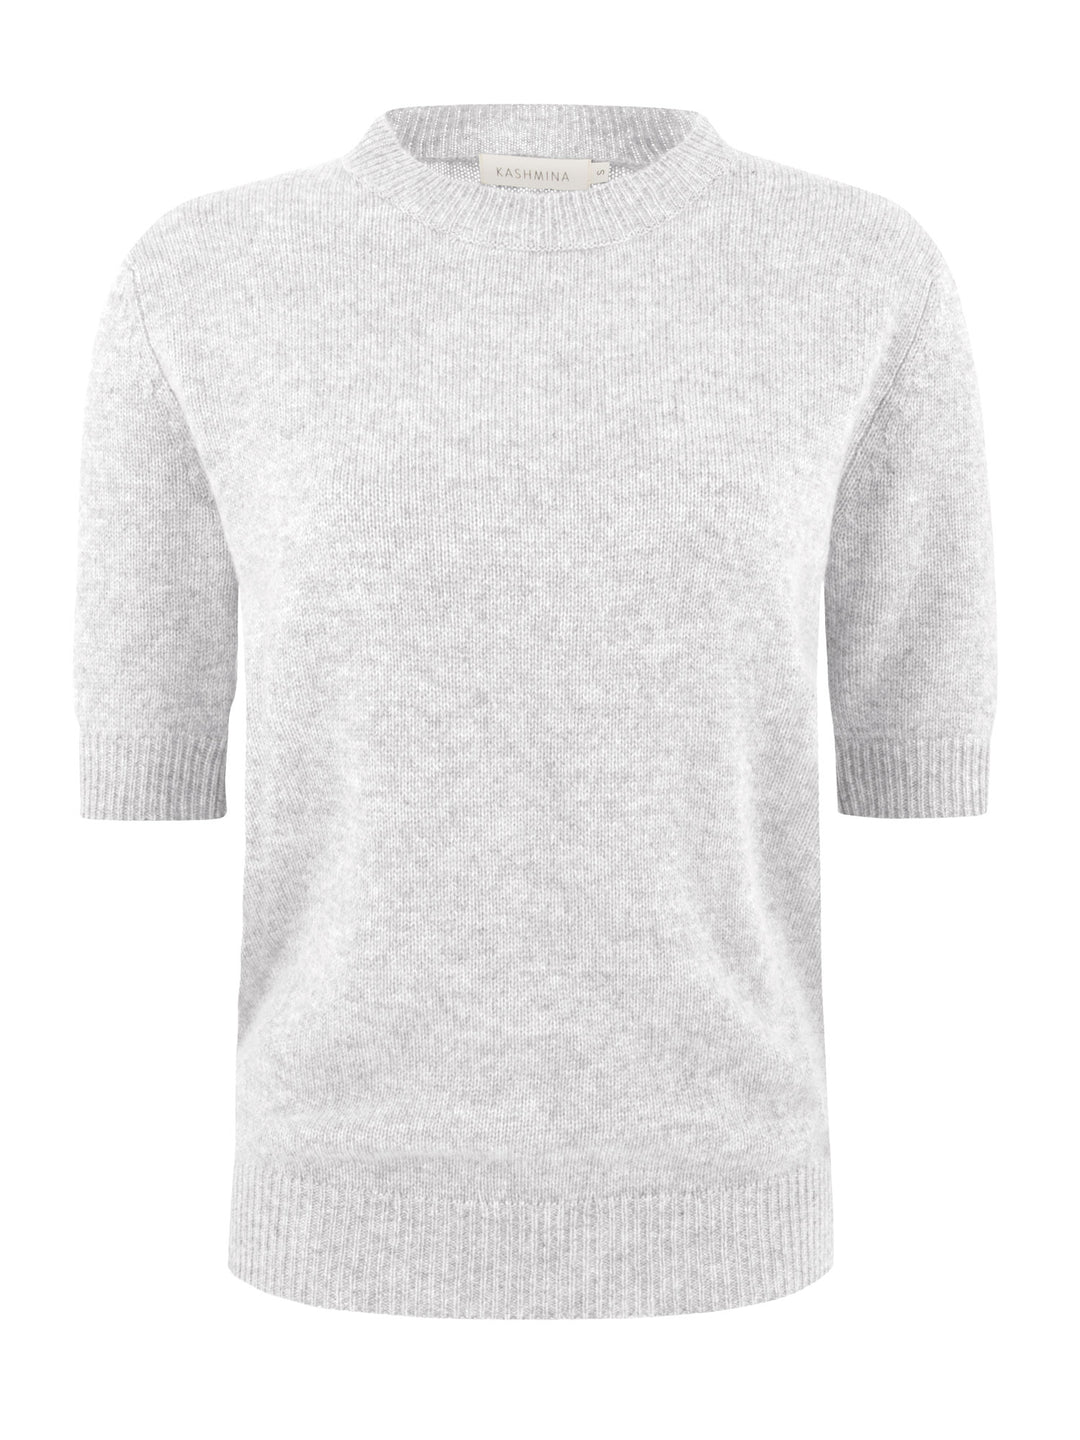 Short sleeved cashmere sweater, light grey, from Kashmina, 100% pure cashmere, natural